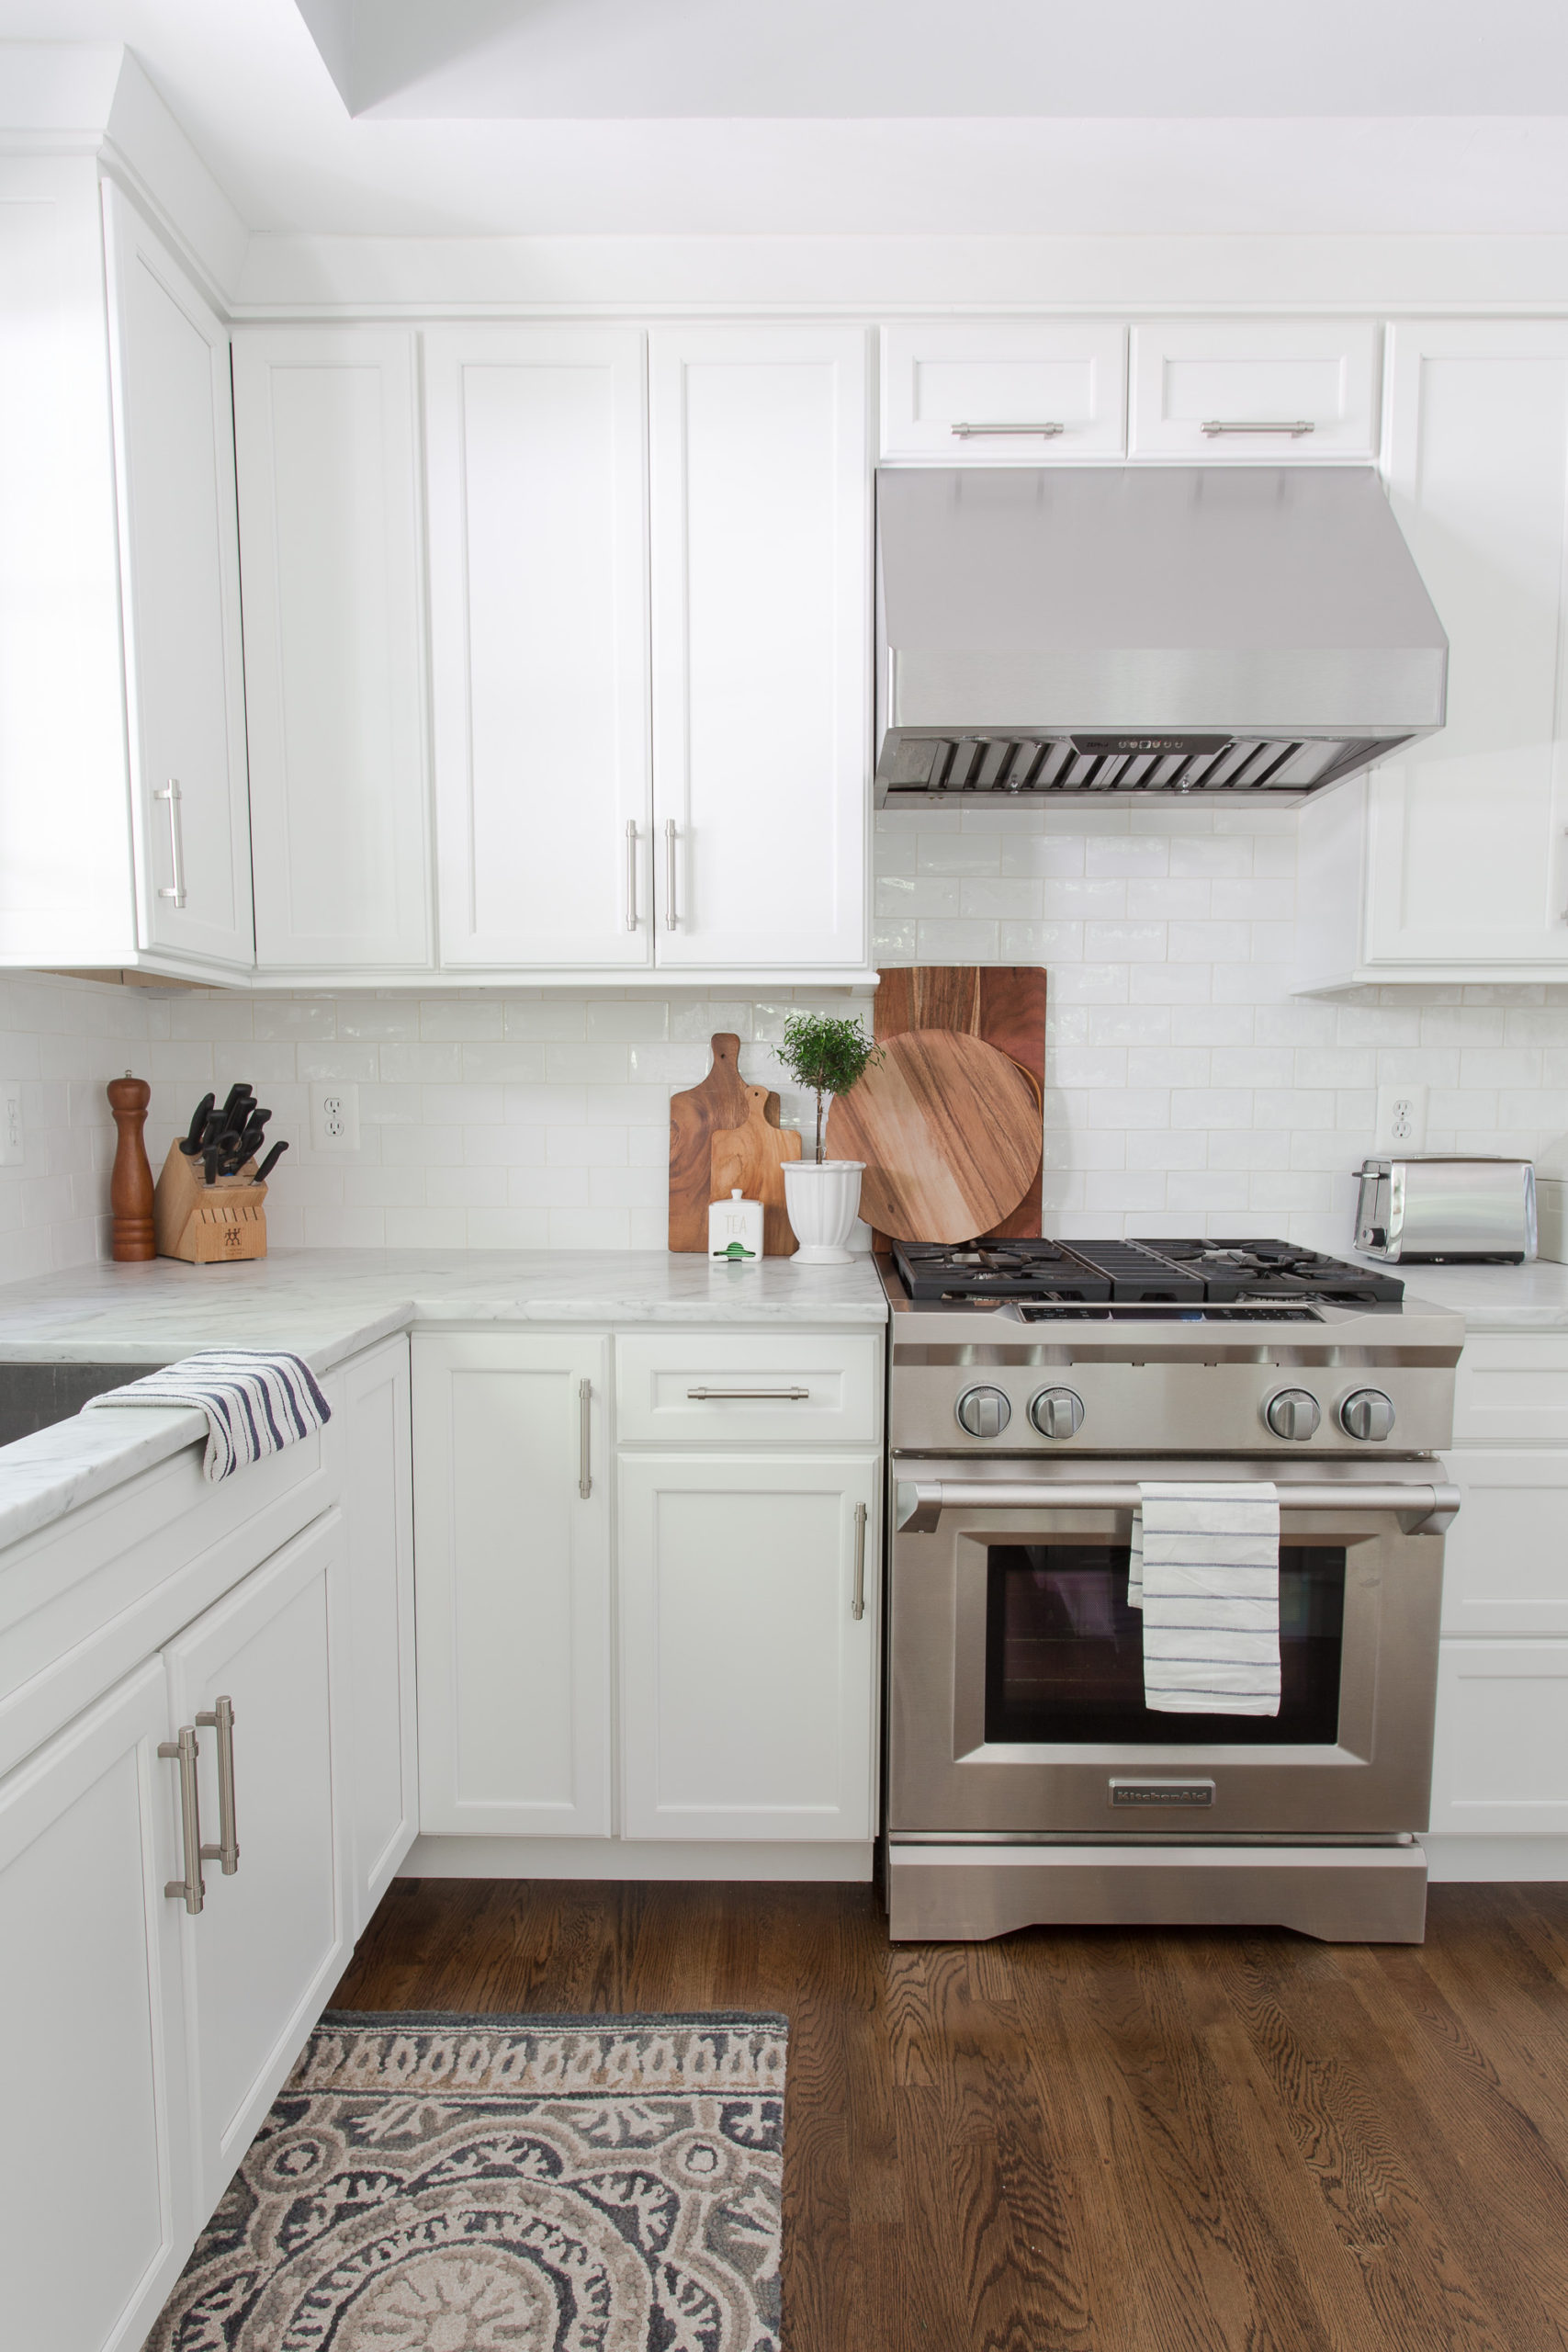 Stainless steel range in white kitchen with white tile backsplash and wooden tray leaning on the wall. 